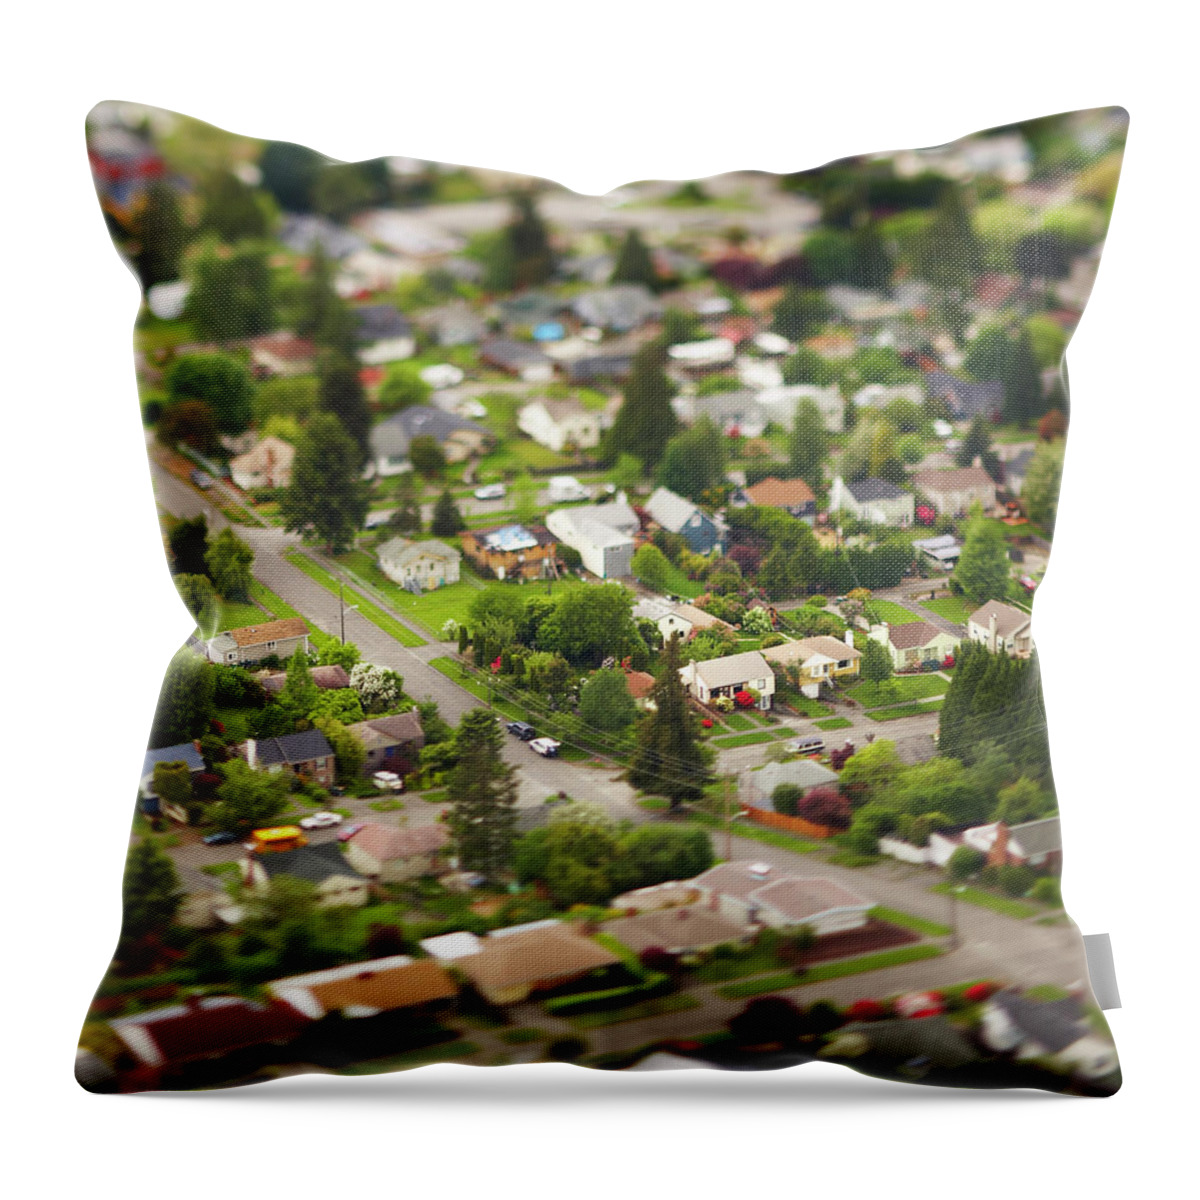 Suburb Throw Pillow featuring the photograph Aerial by Thomas Northcut